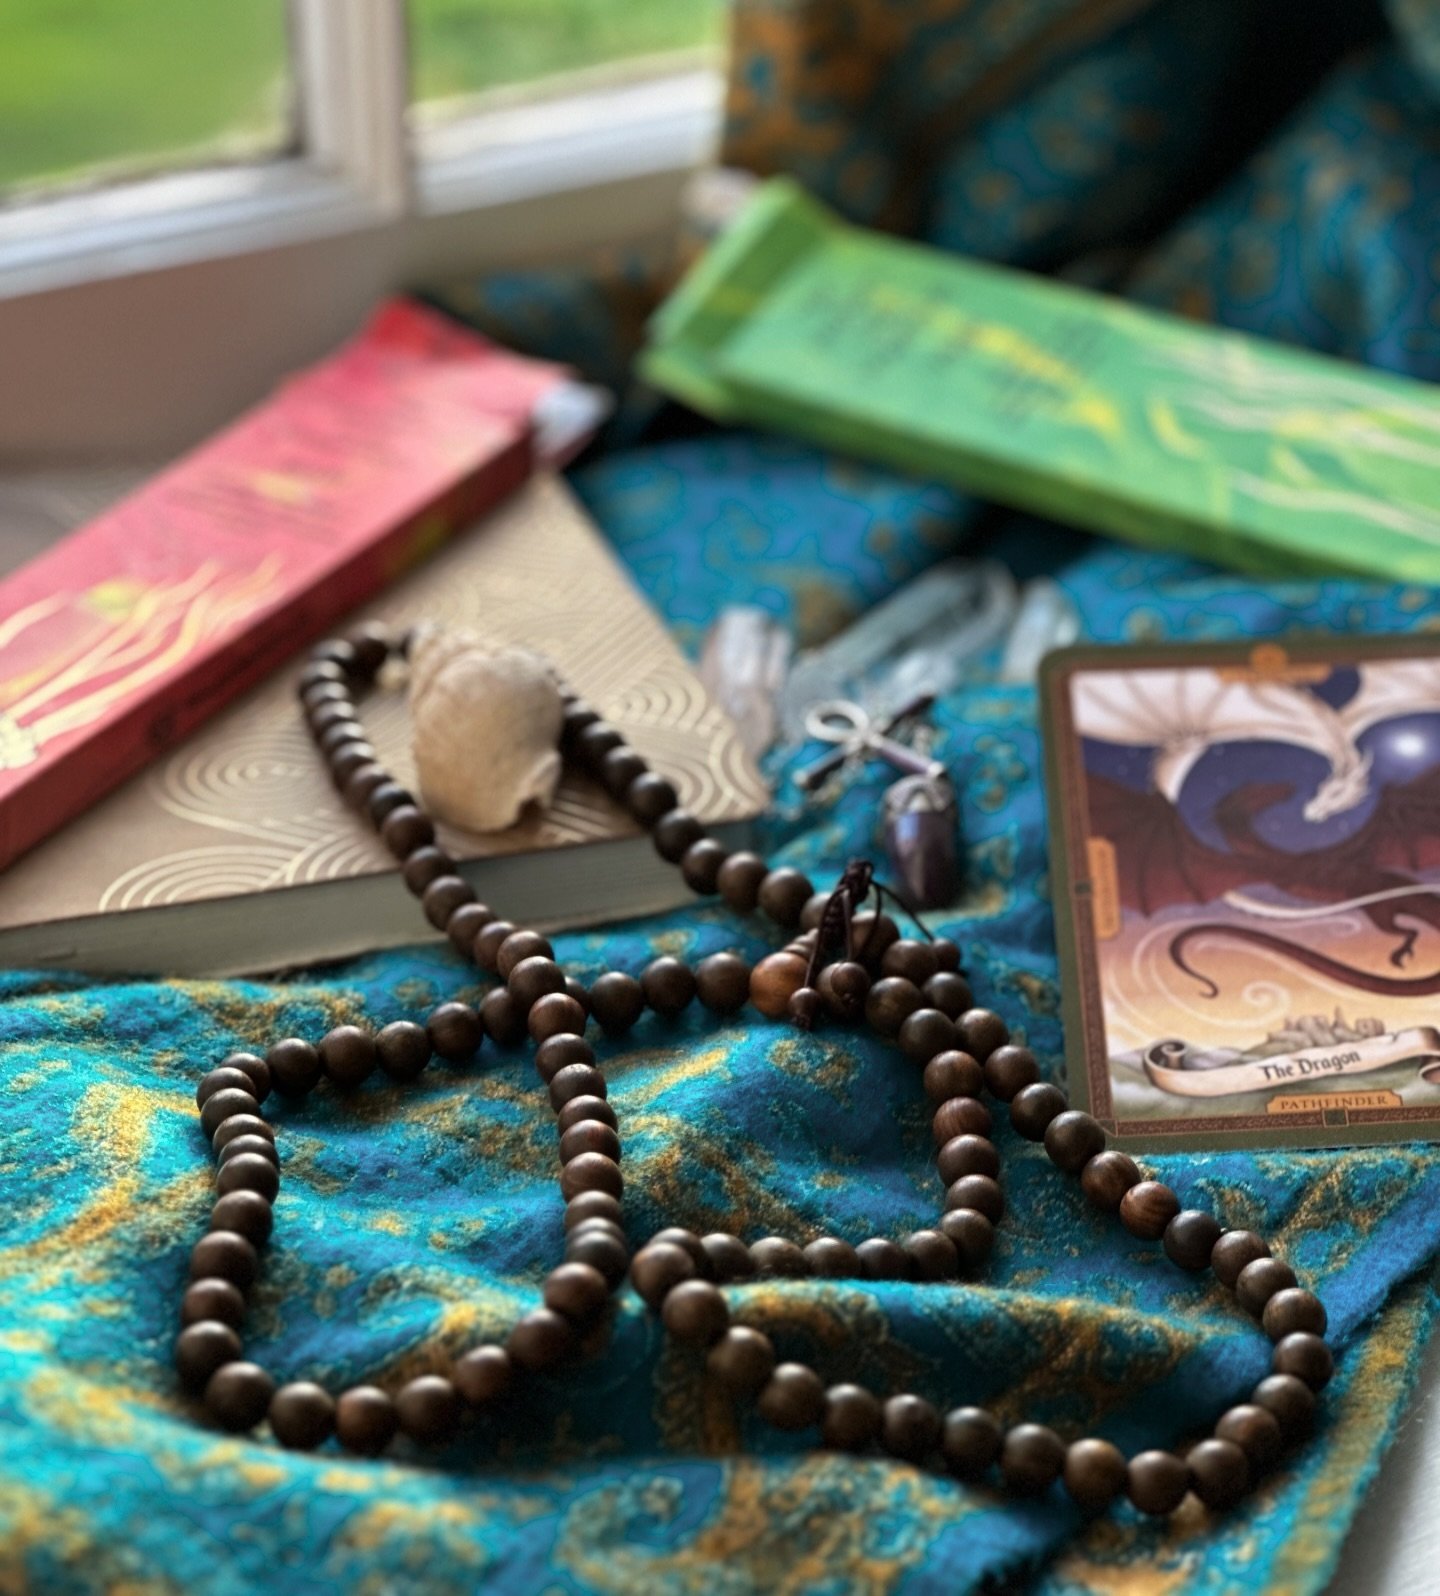 Some essential travel items I usually carry with me for my daily practice&hellip;

✨ Journal for ideas, releasing, and tale weaving

✨ Mala Necklace for mantras

✨ Crystals for record keeping 

✨ Oracle cards to read which way the energetic wind blow